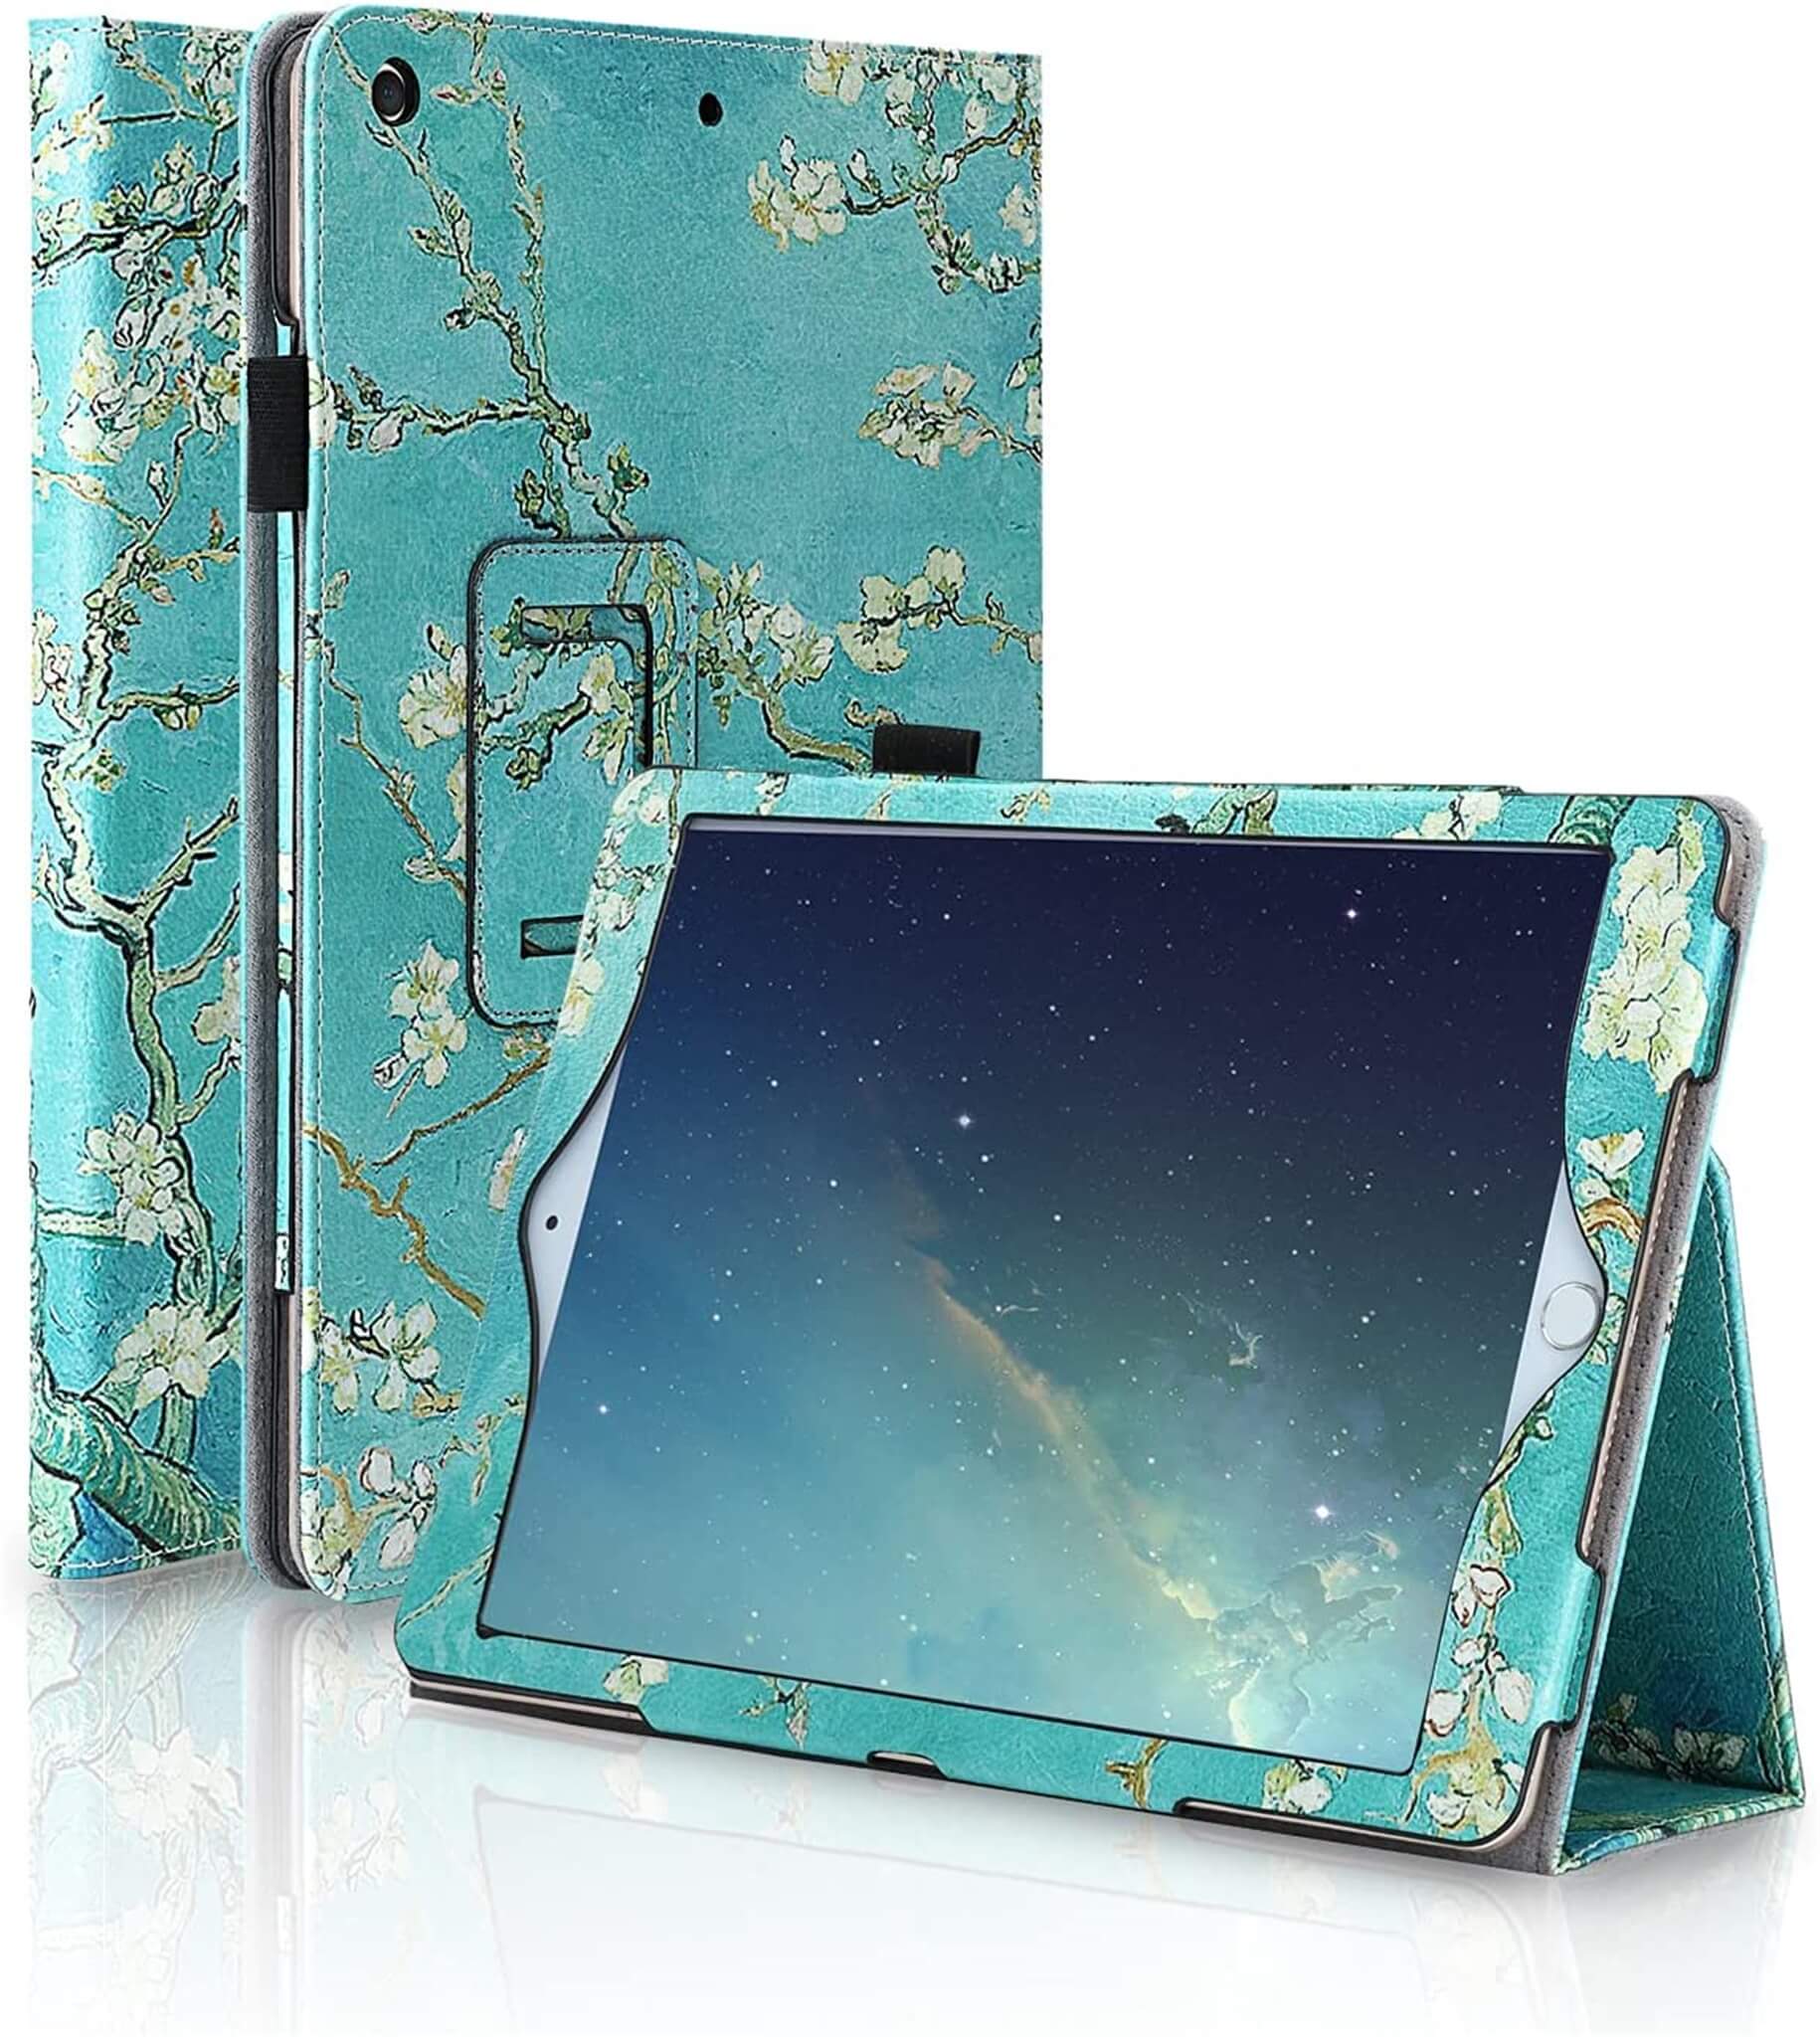 iPad 10.2 inch Magnetic Closure Smart Cover